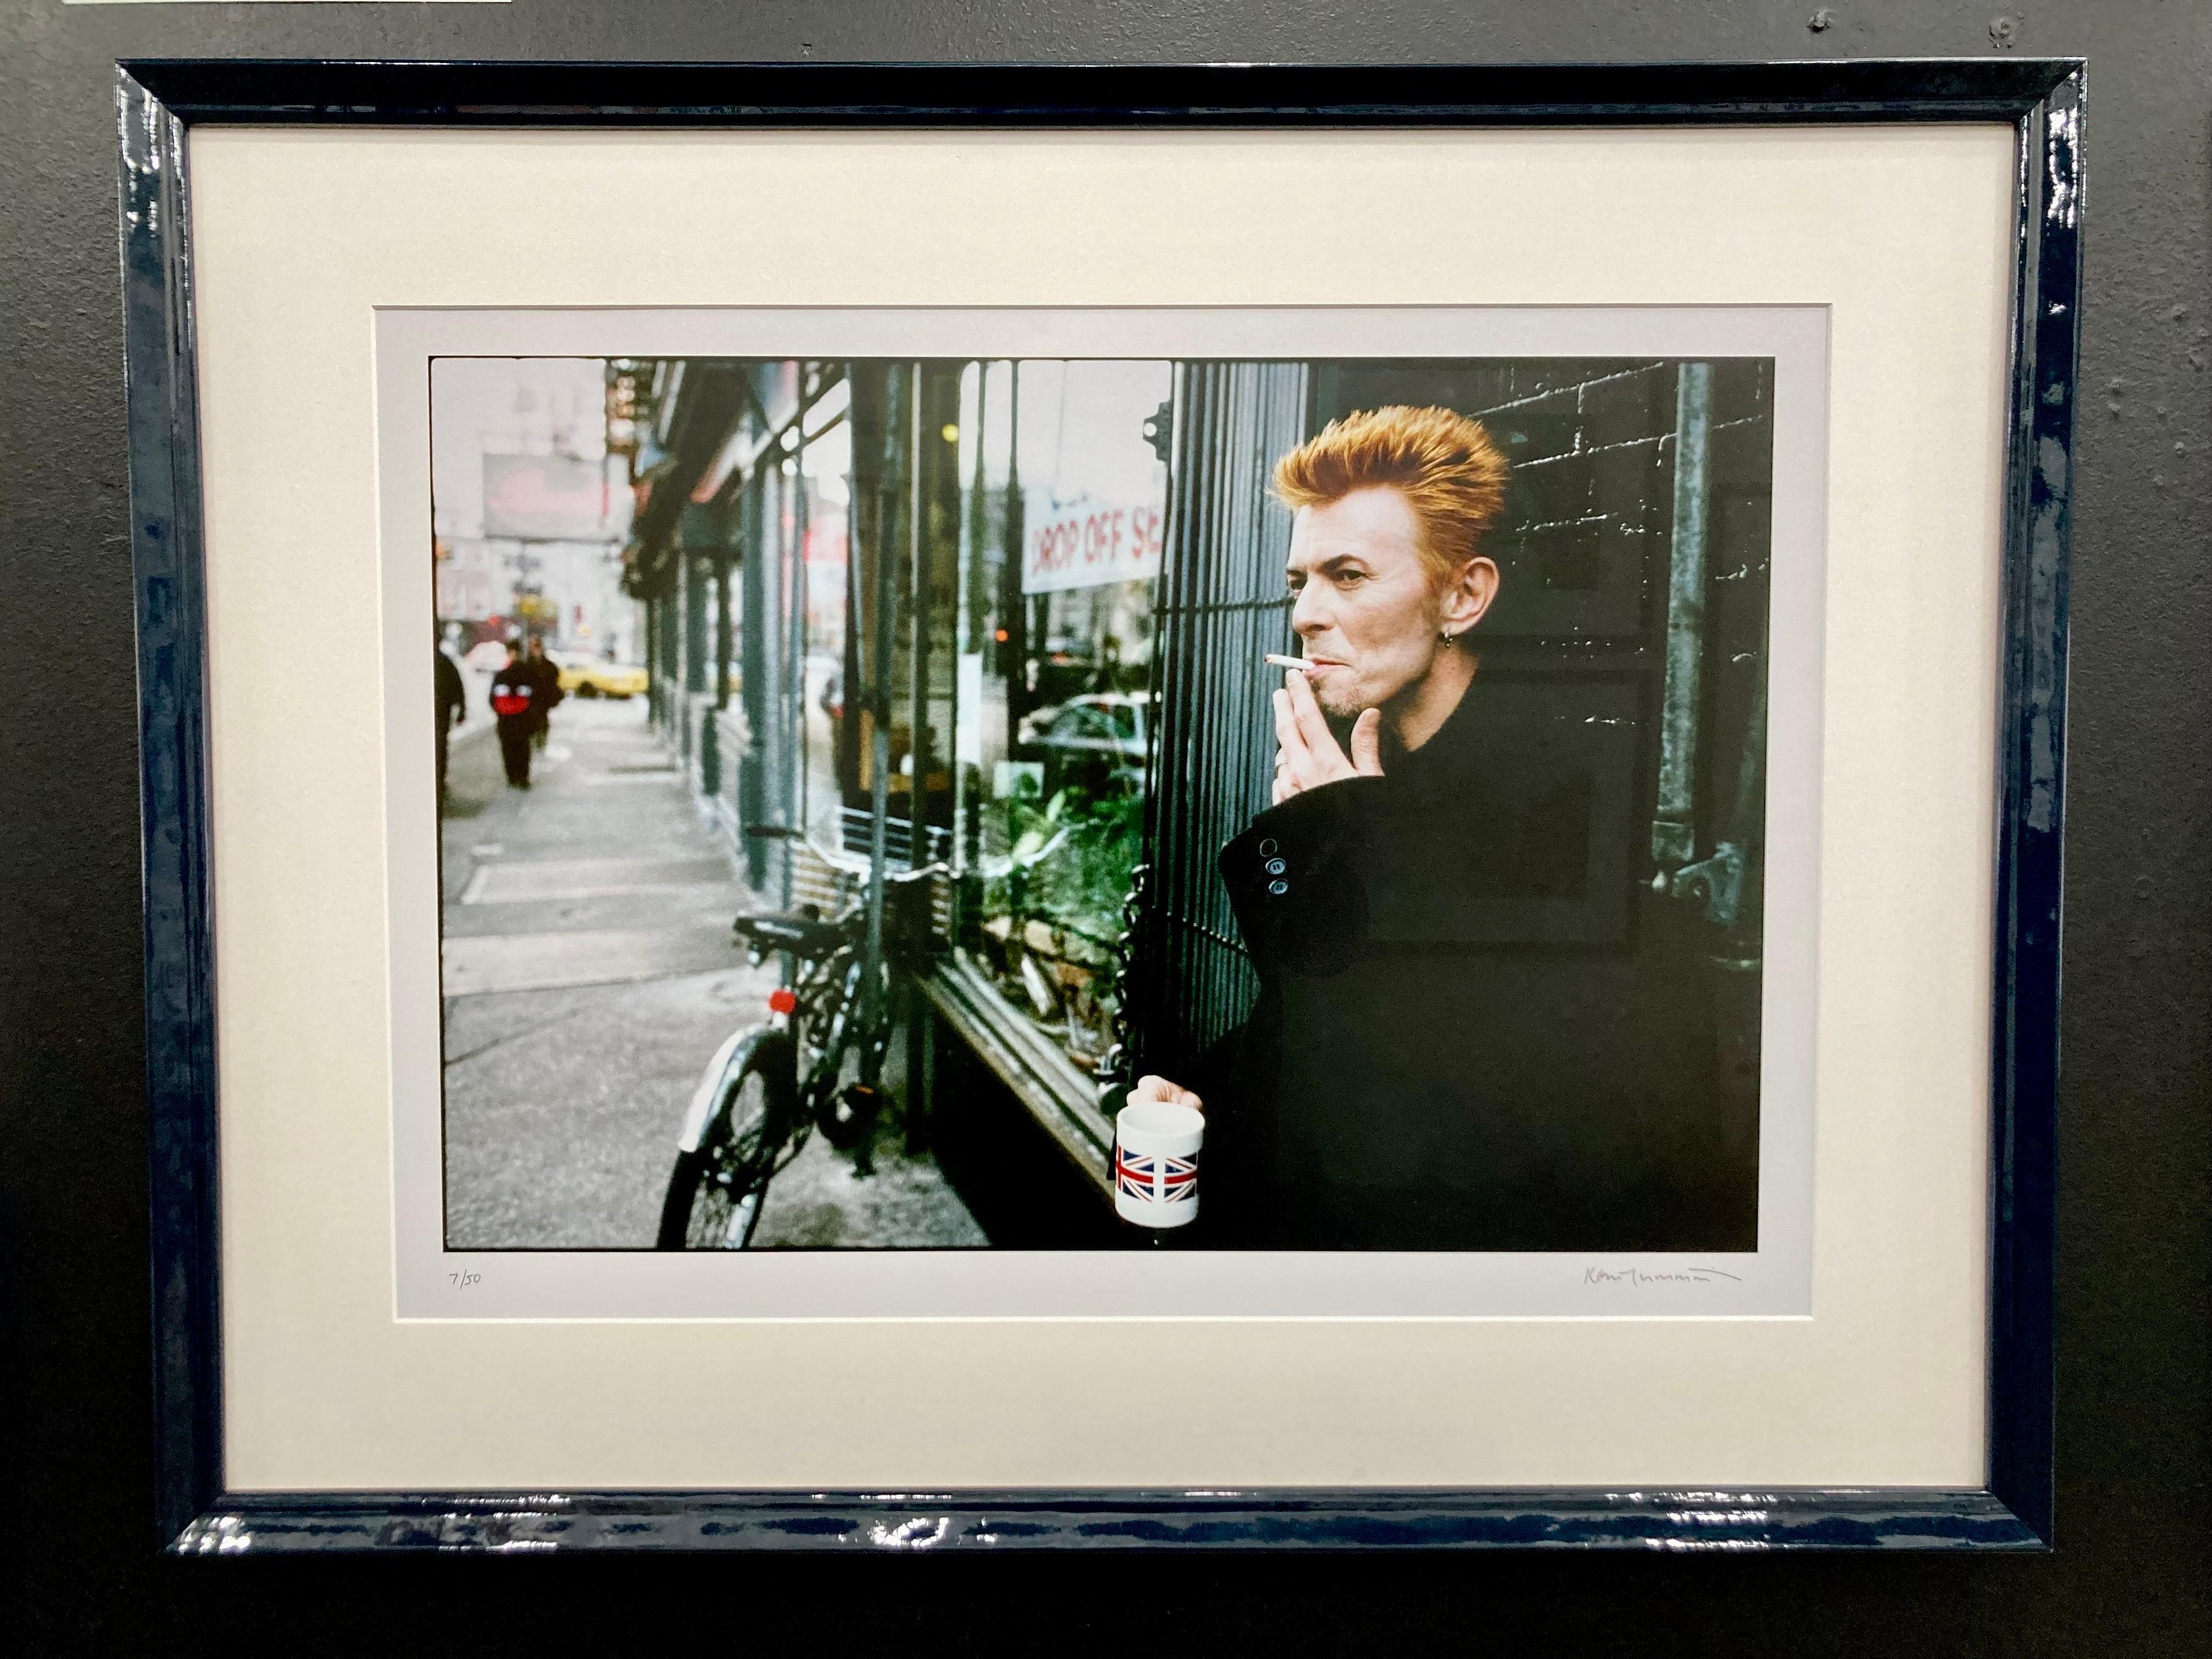 David Bowie Tea and Sympathy New York City, framed signed limited edition print - Photograph by Kevin Cummins